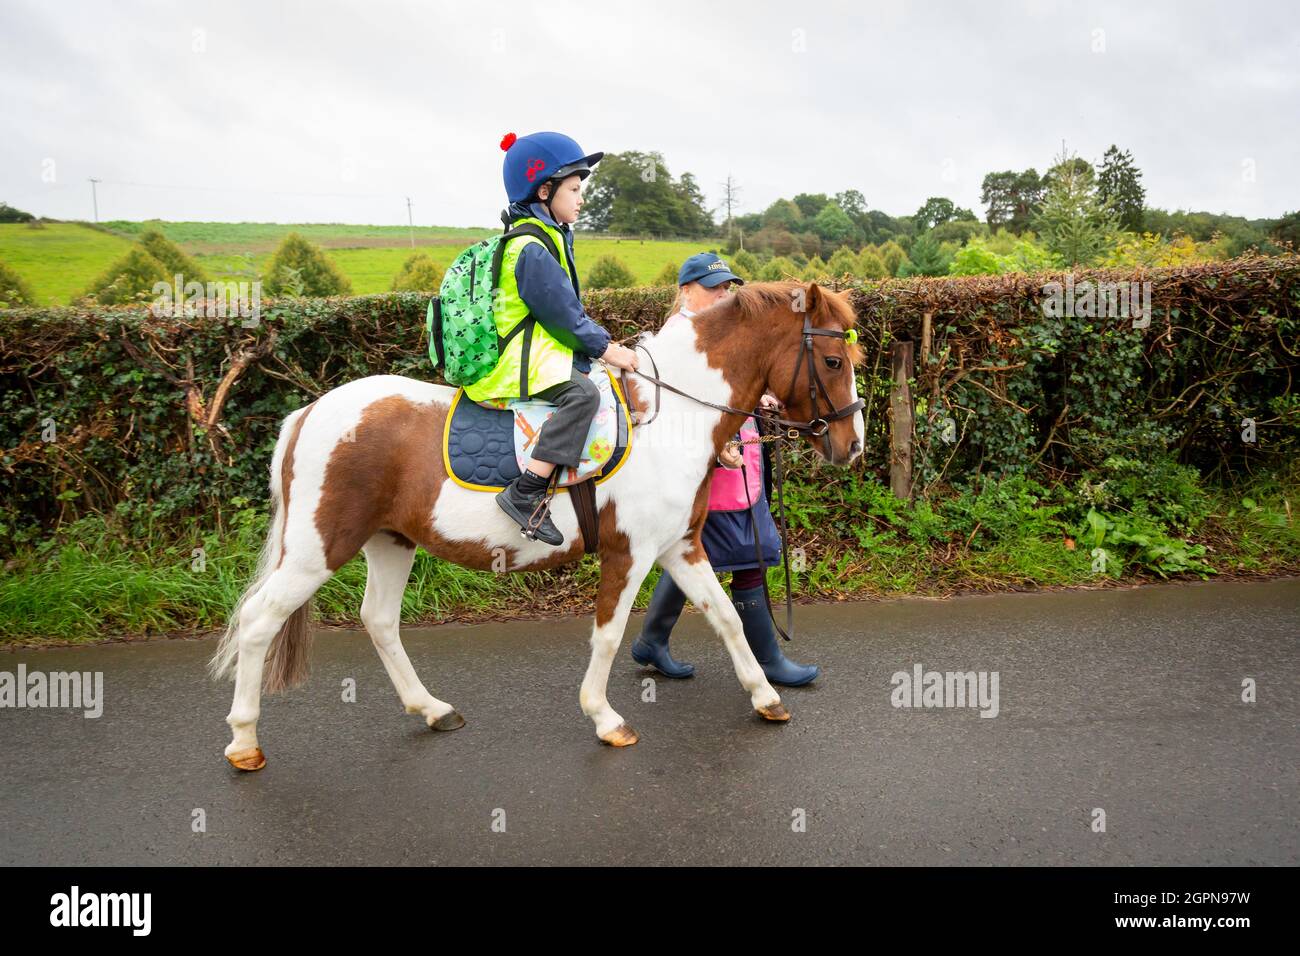 Upper Arley, Worcestershire, UK. 30th Sep, 2021. Grandmother Jane Mundie beats the fuel shortage crisis by using her pony 'Fern' on the school run. Her grandson Henley, 8, confidently rides the pony the two miles to Upper Arley C of E primary school in rural Worcestershire. 'I can't get diesel for my Land Rover at the moment but we don't need to worry too much when the children have our pony, Fern. And it's definitely a fun and green way to get to school,' says Jane. Credit: Peter Lopeman/Alamy Live News Stock Photo